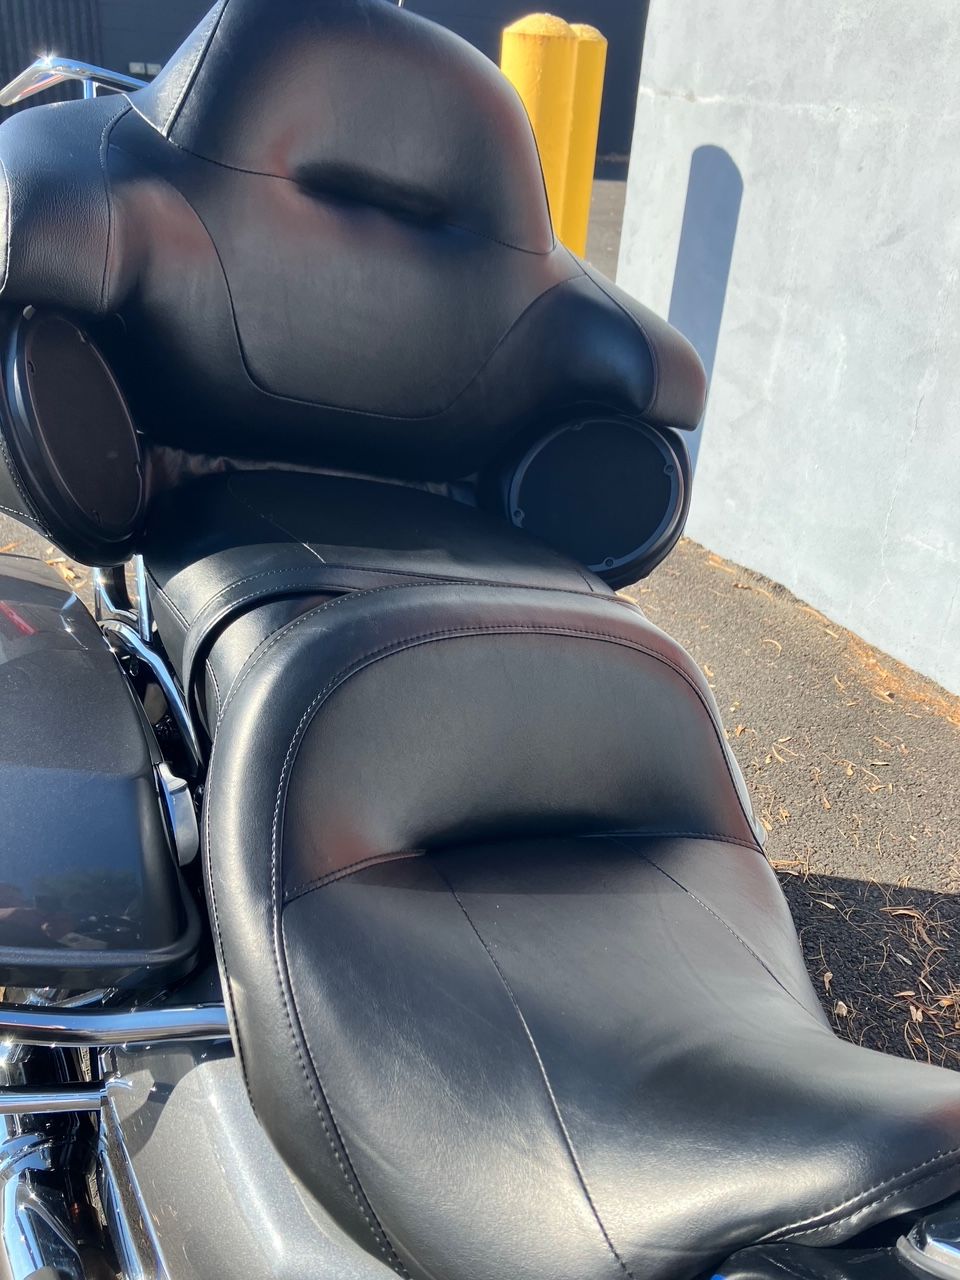 2021 Harley-Davidson ULTRA LIMITED in West Long Branch, New Jersey - Photo 12